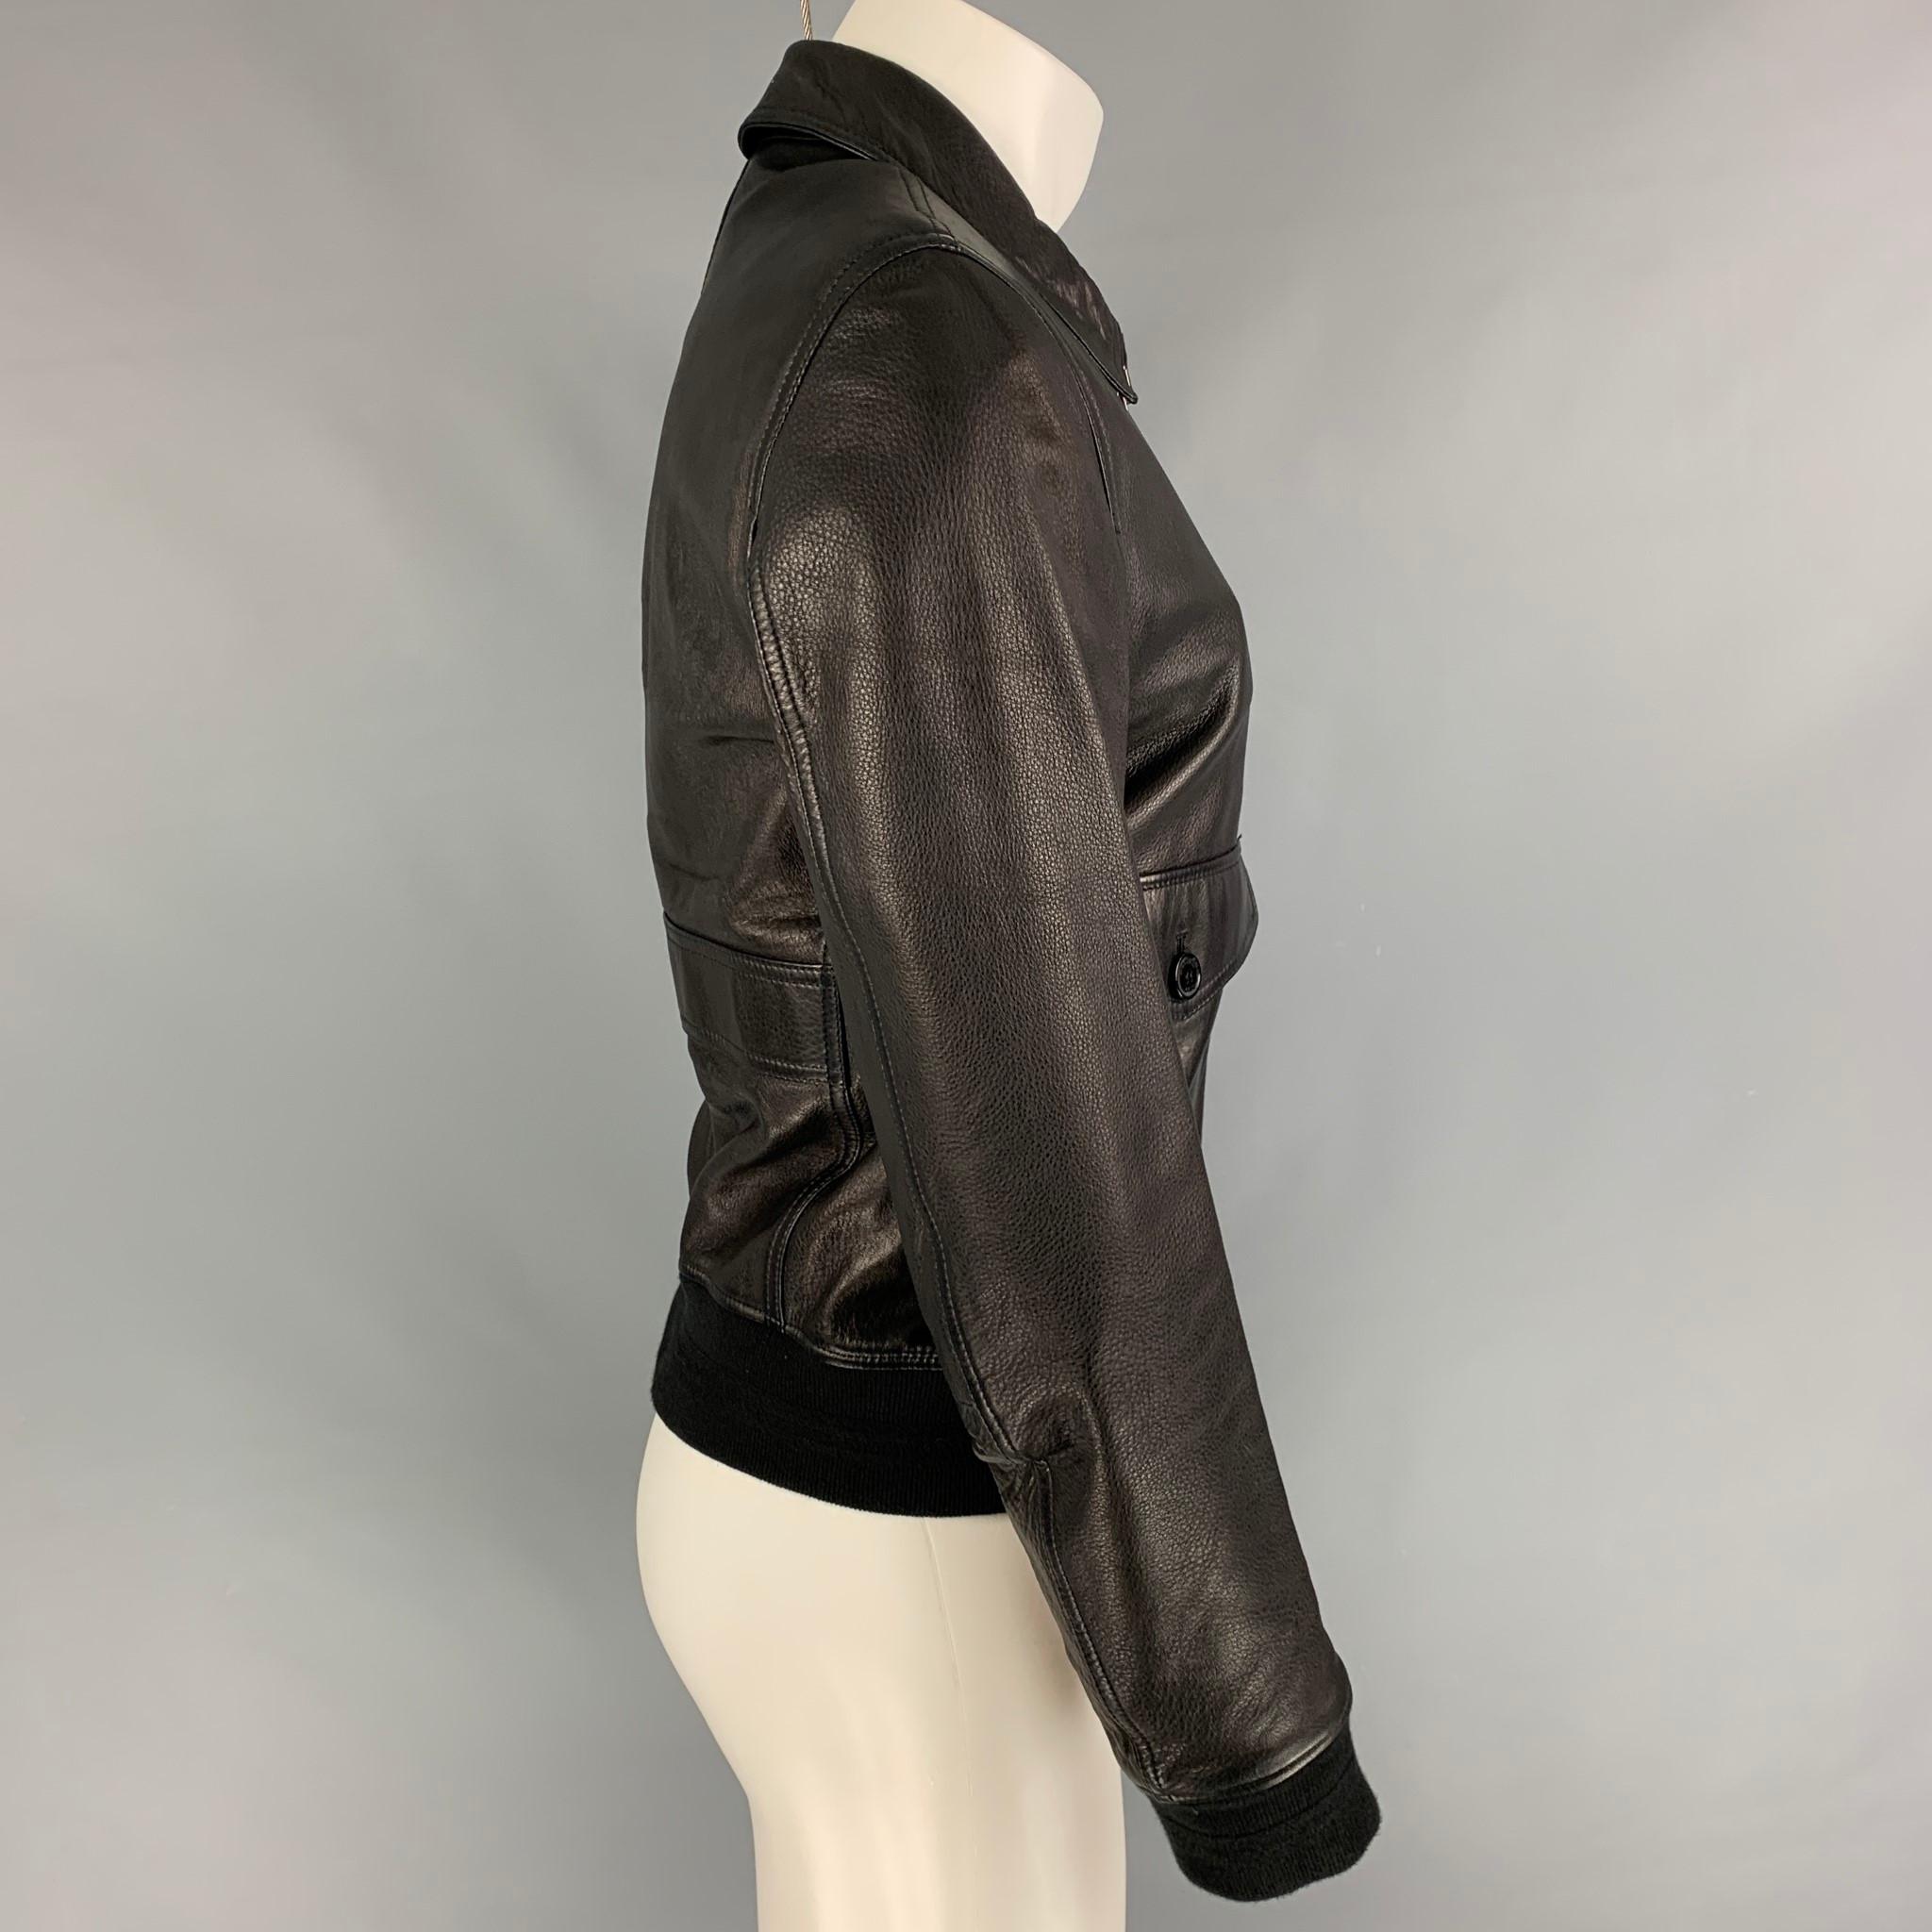 BURBERRY BRIT jacket comes in a black leather with a plaid liner featuring a ribbed hem, front pockets, spread collar, and a zip up closure. 

Very Good Pre-Owned Condition.
Marked: M

Measurements:

Shoulder: 18 in.
Chest: 40 in.
Sleeve: 26